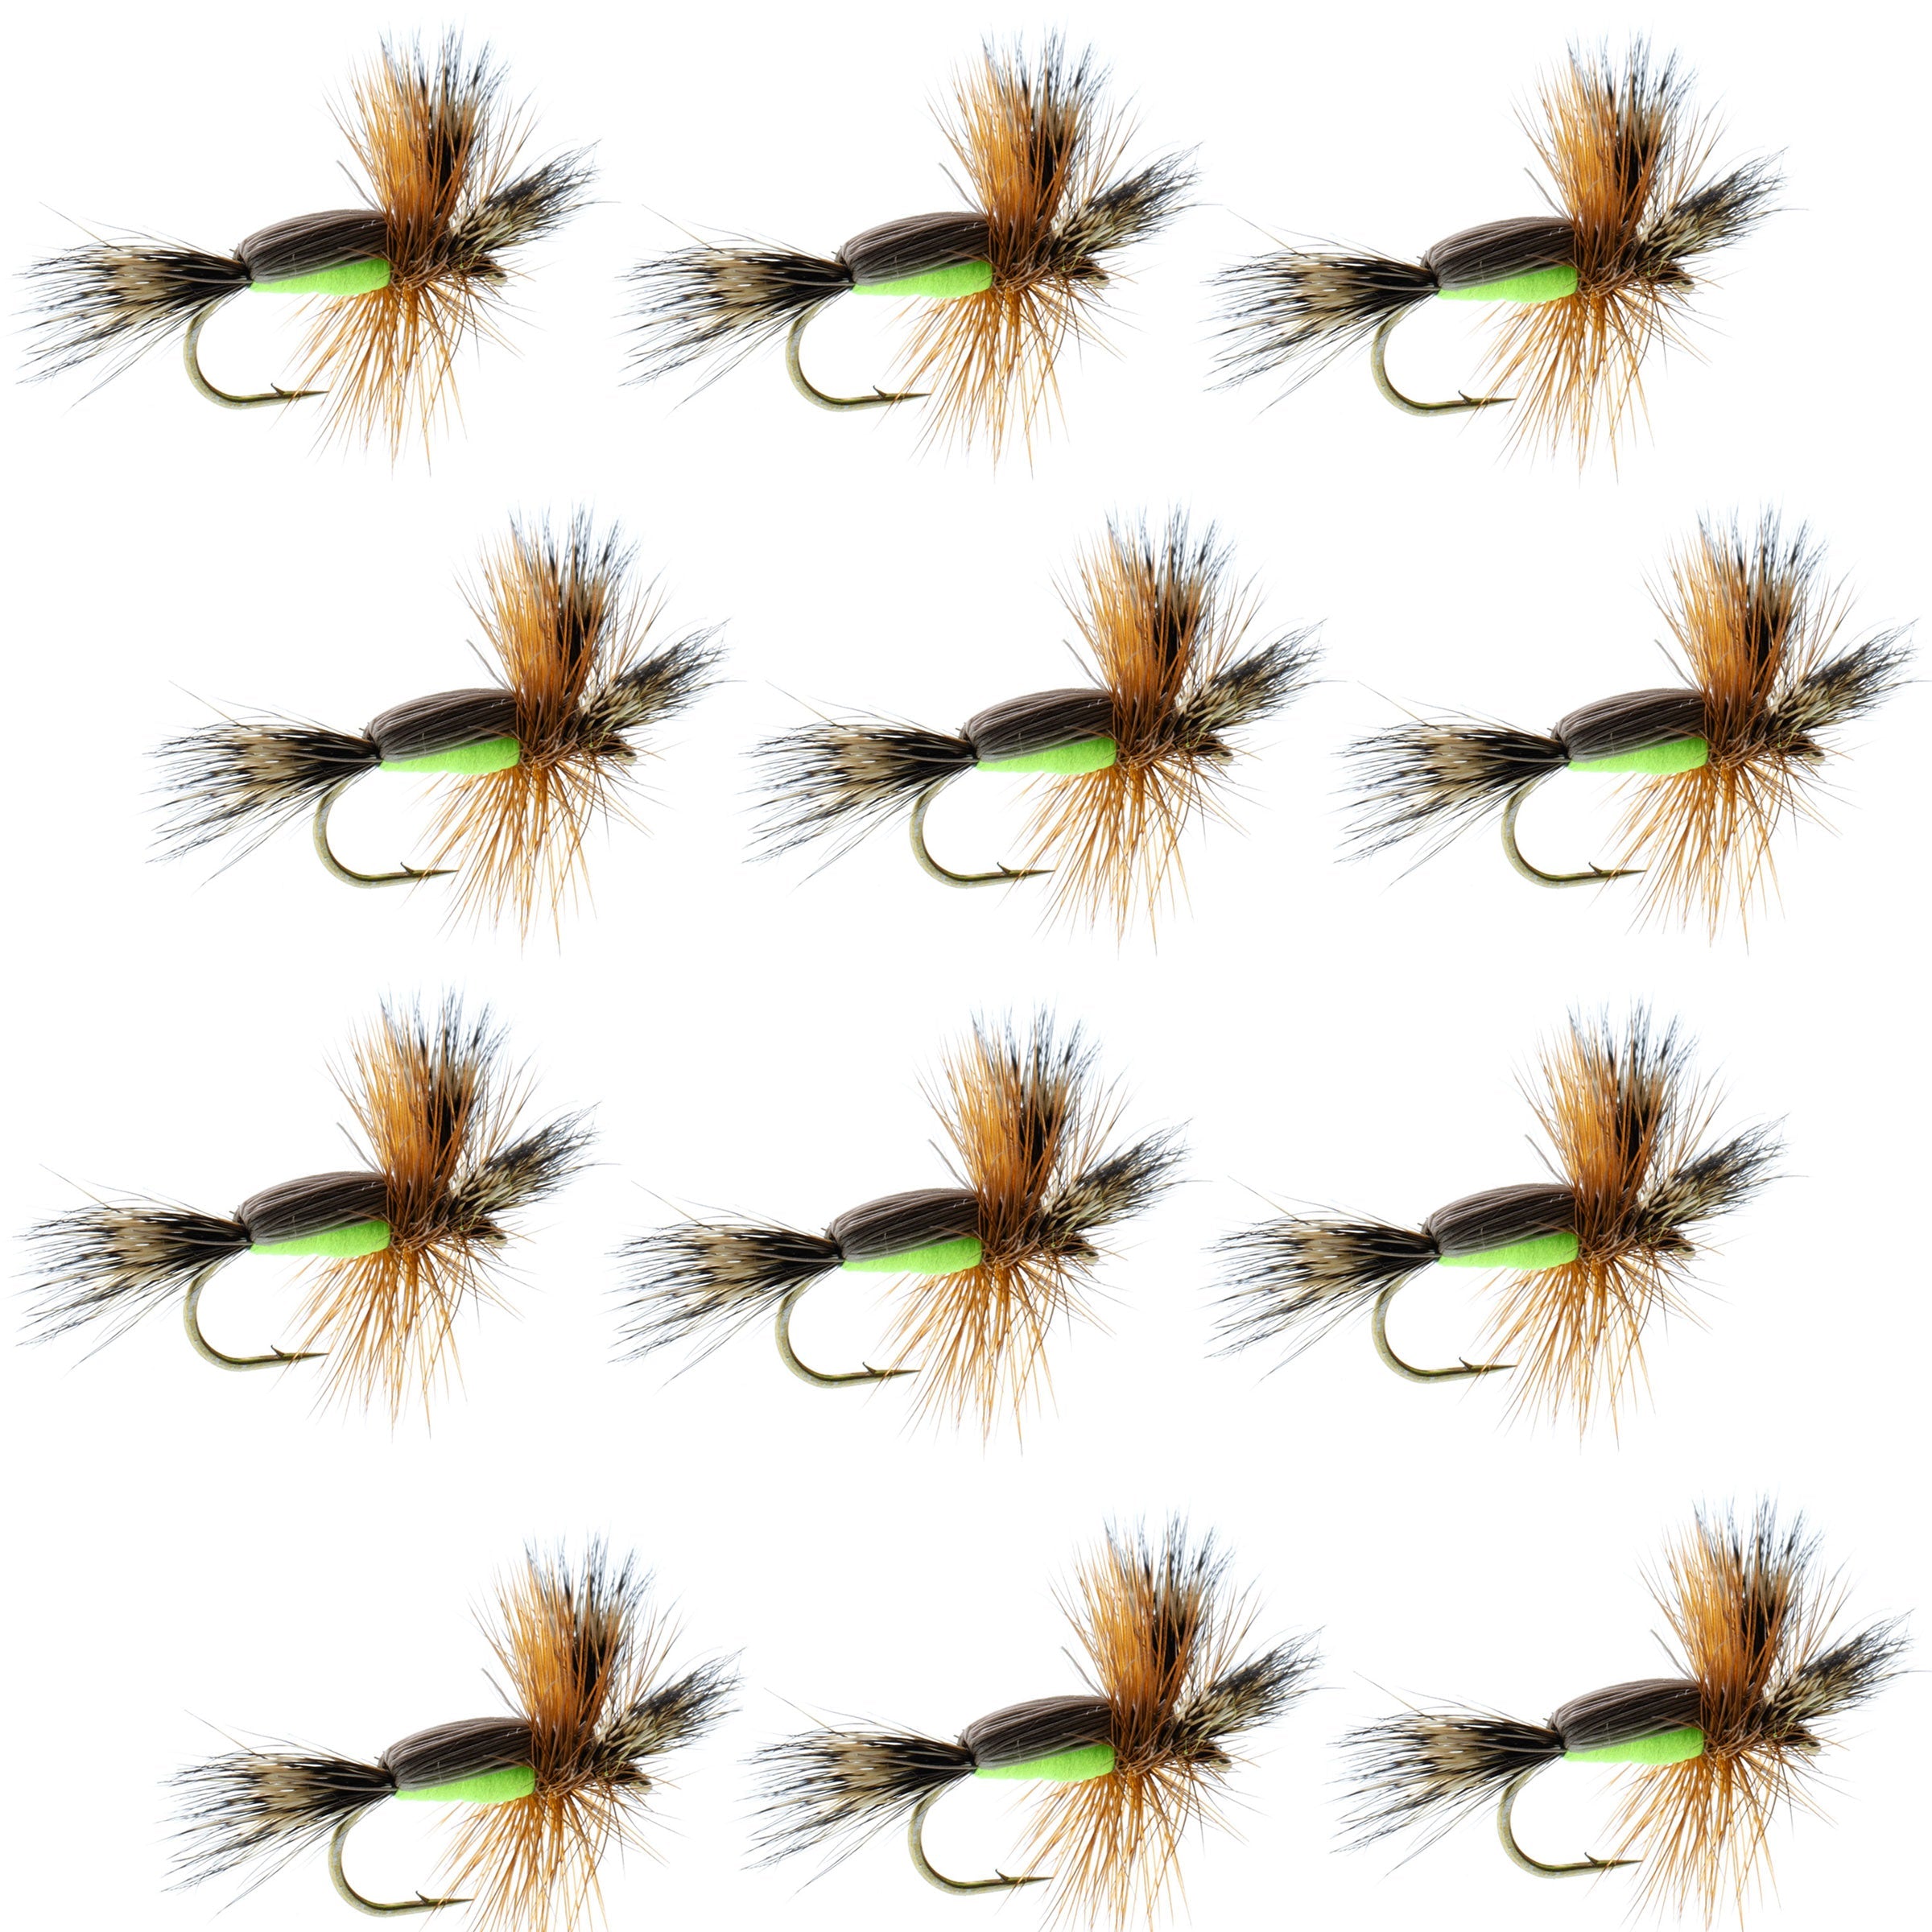 Chartreuse Humpy Classic Hair Wing Dry Fly - 1 docena de anzuelos para moscas, tamaño 12